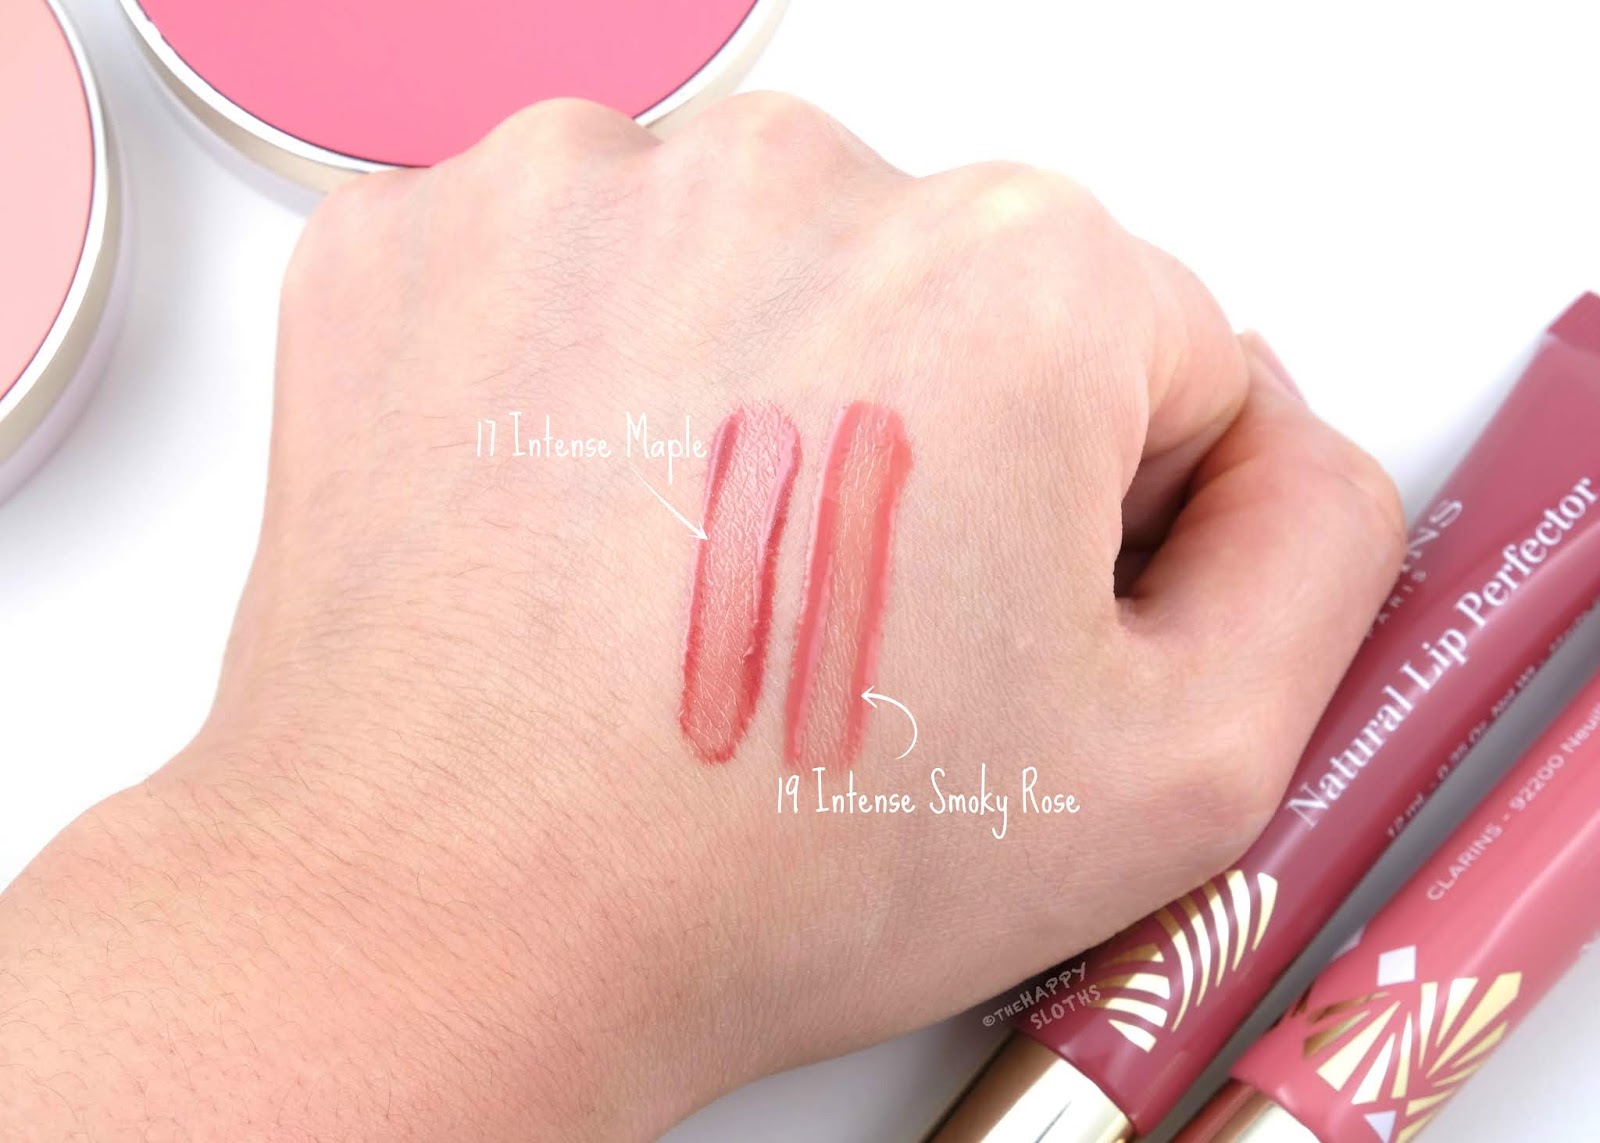 Clarins | Fall 2019 Natural Lip Perfector in "17 Intense Maple" & "19 Intense Smoky Rose": Review and Swatches